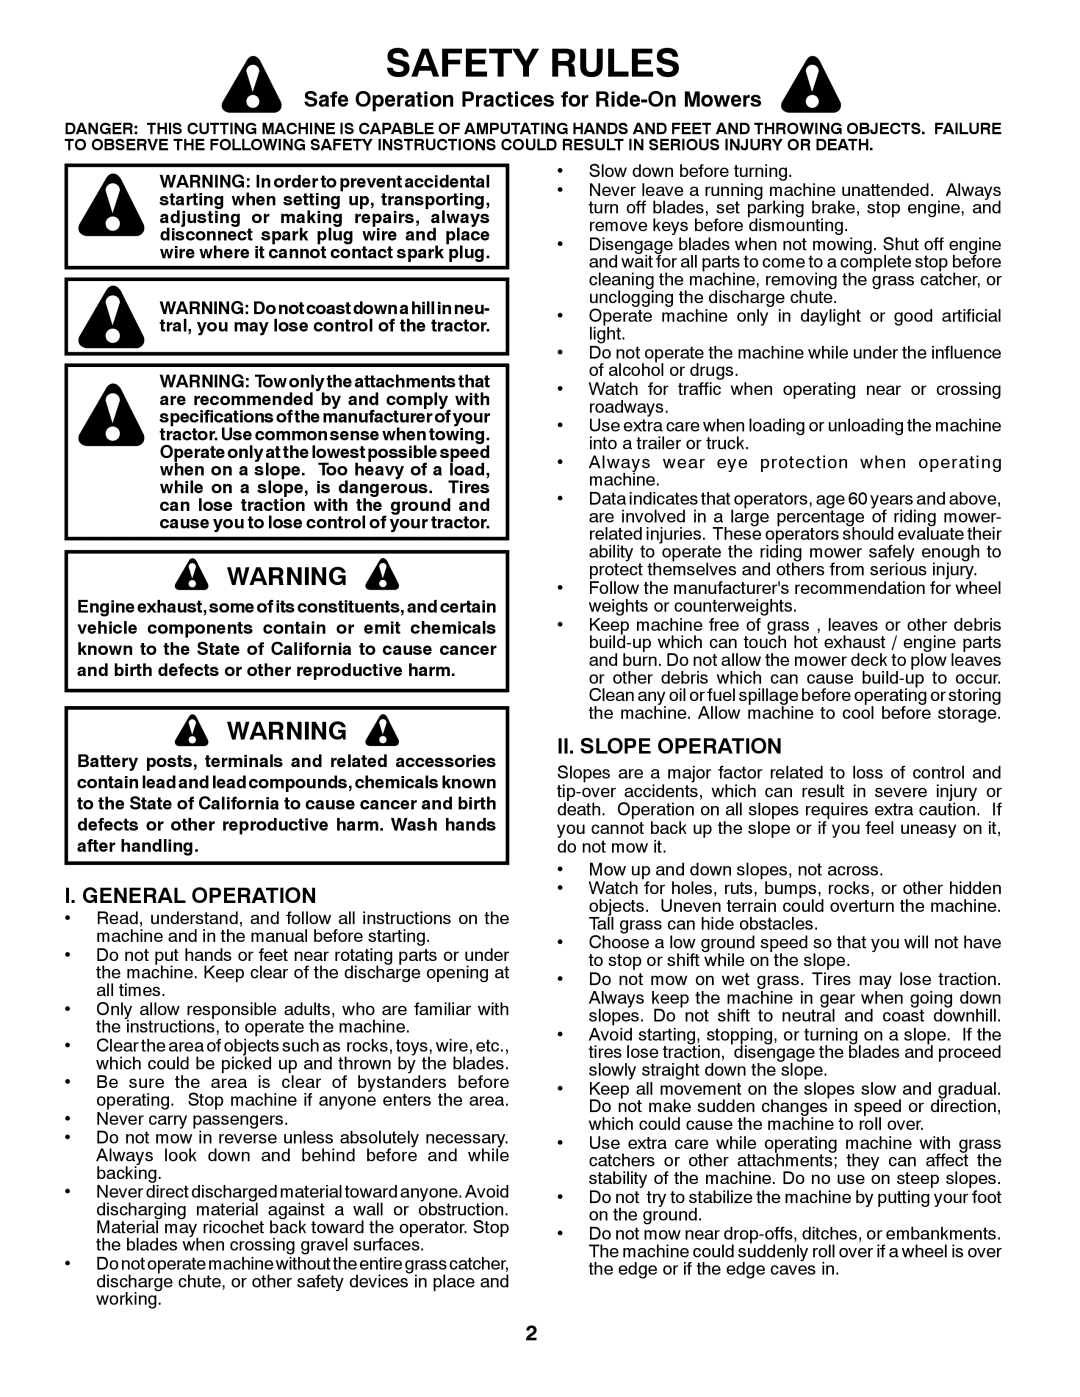 Husqvarna 917.289570 Safety Rules, Safe Operation Practices for Ride-On Mowers, I. General Operation, Ii. Slope Operation 